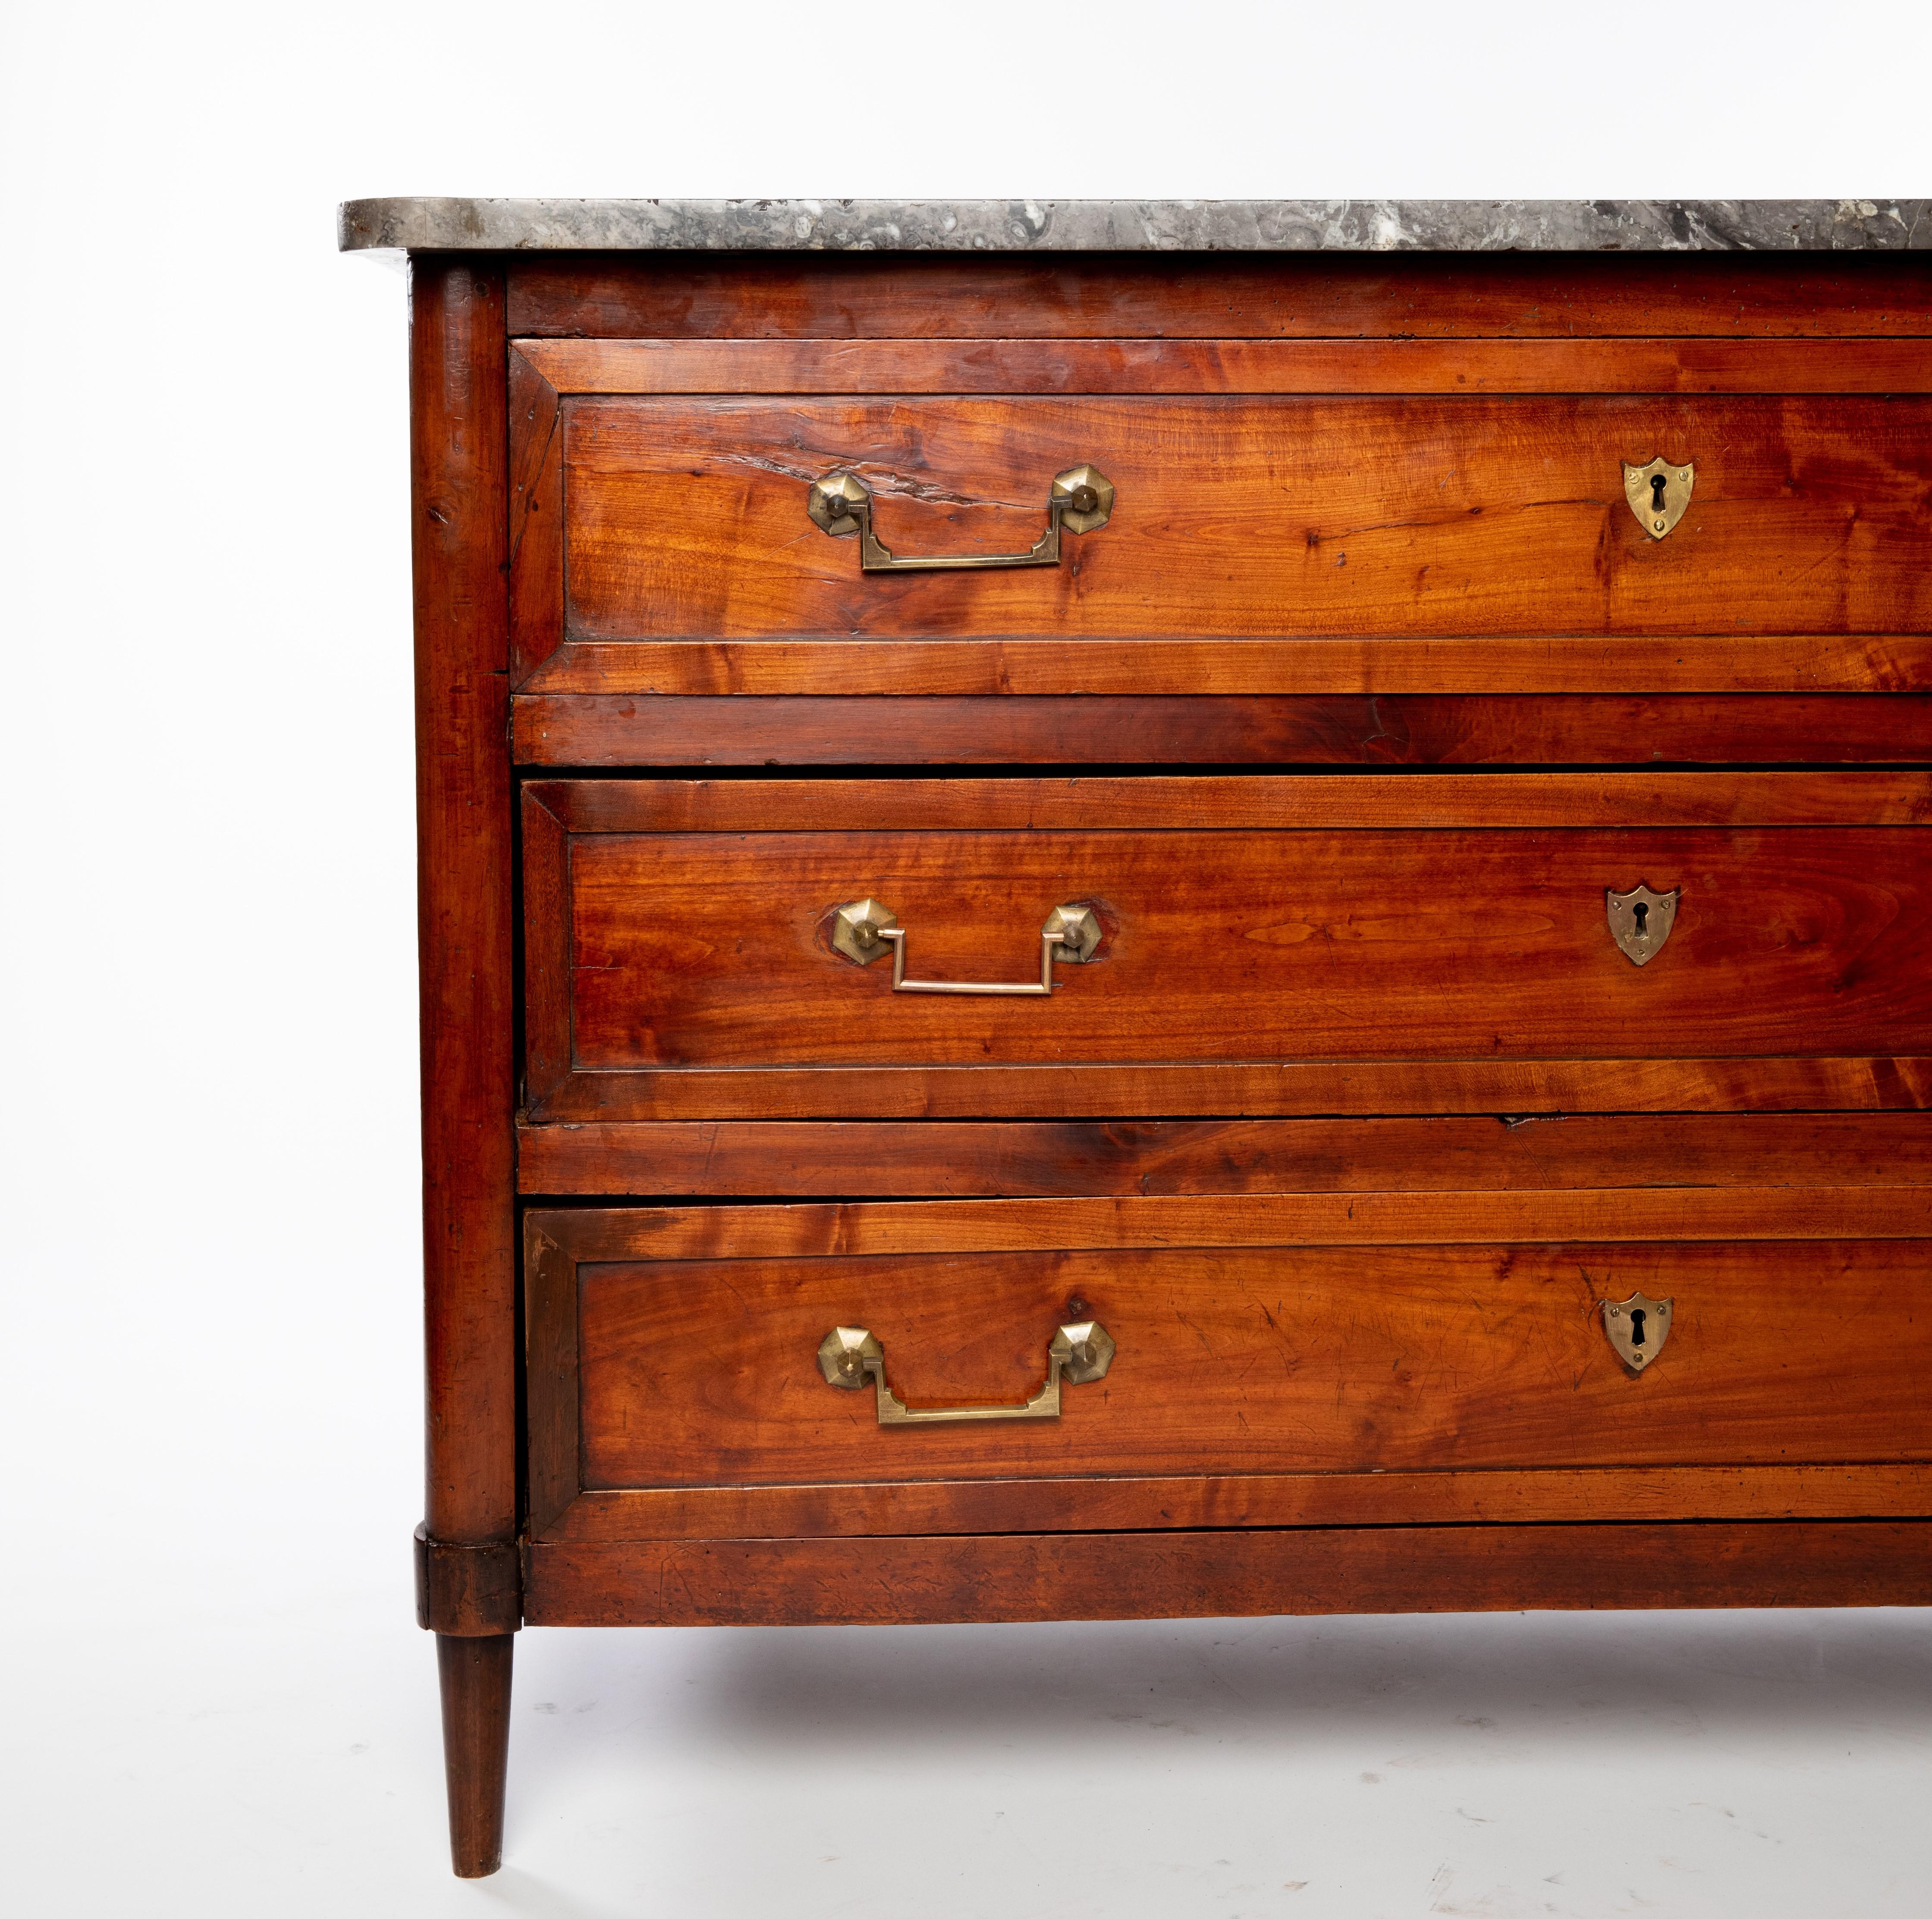 French Louis XVI period marble-top fruitwood commode, late 18th c., shaped marble top, over case fitted with three drawers, rising on tapered legs, (one) foot with restoration.